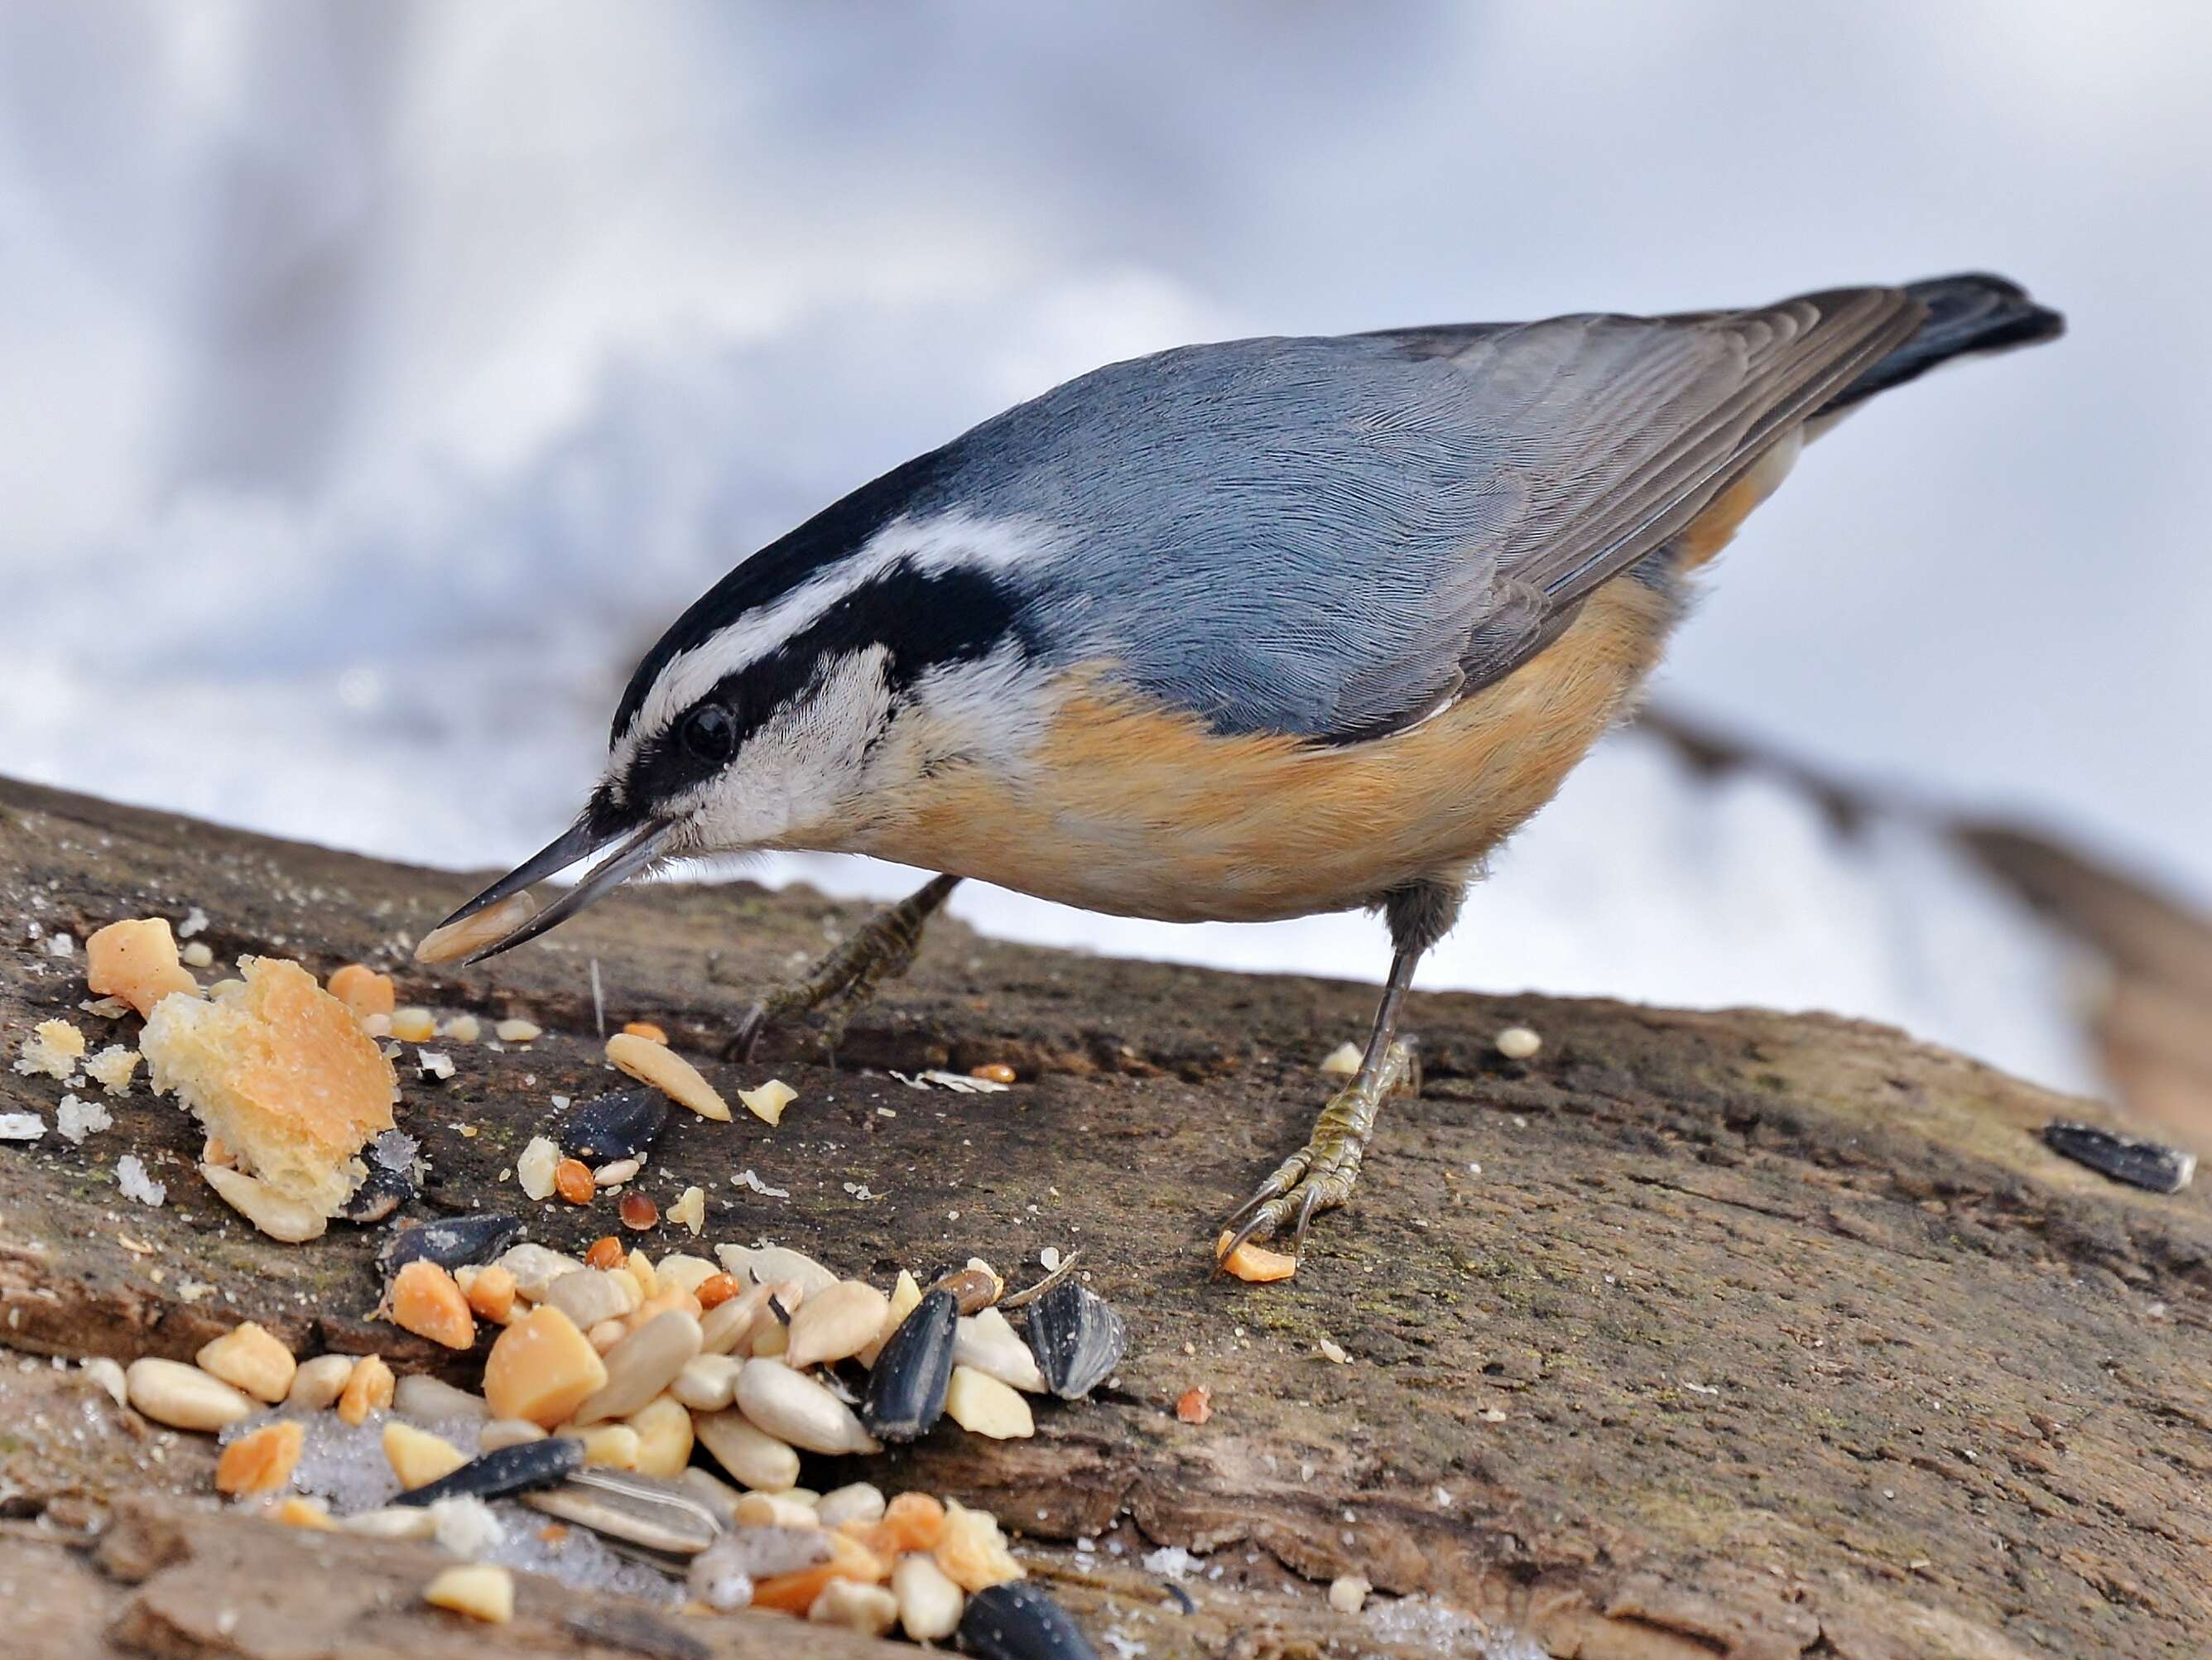 Image of Red-breasted Nuthatch